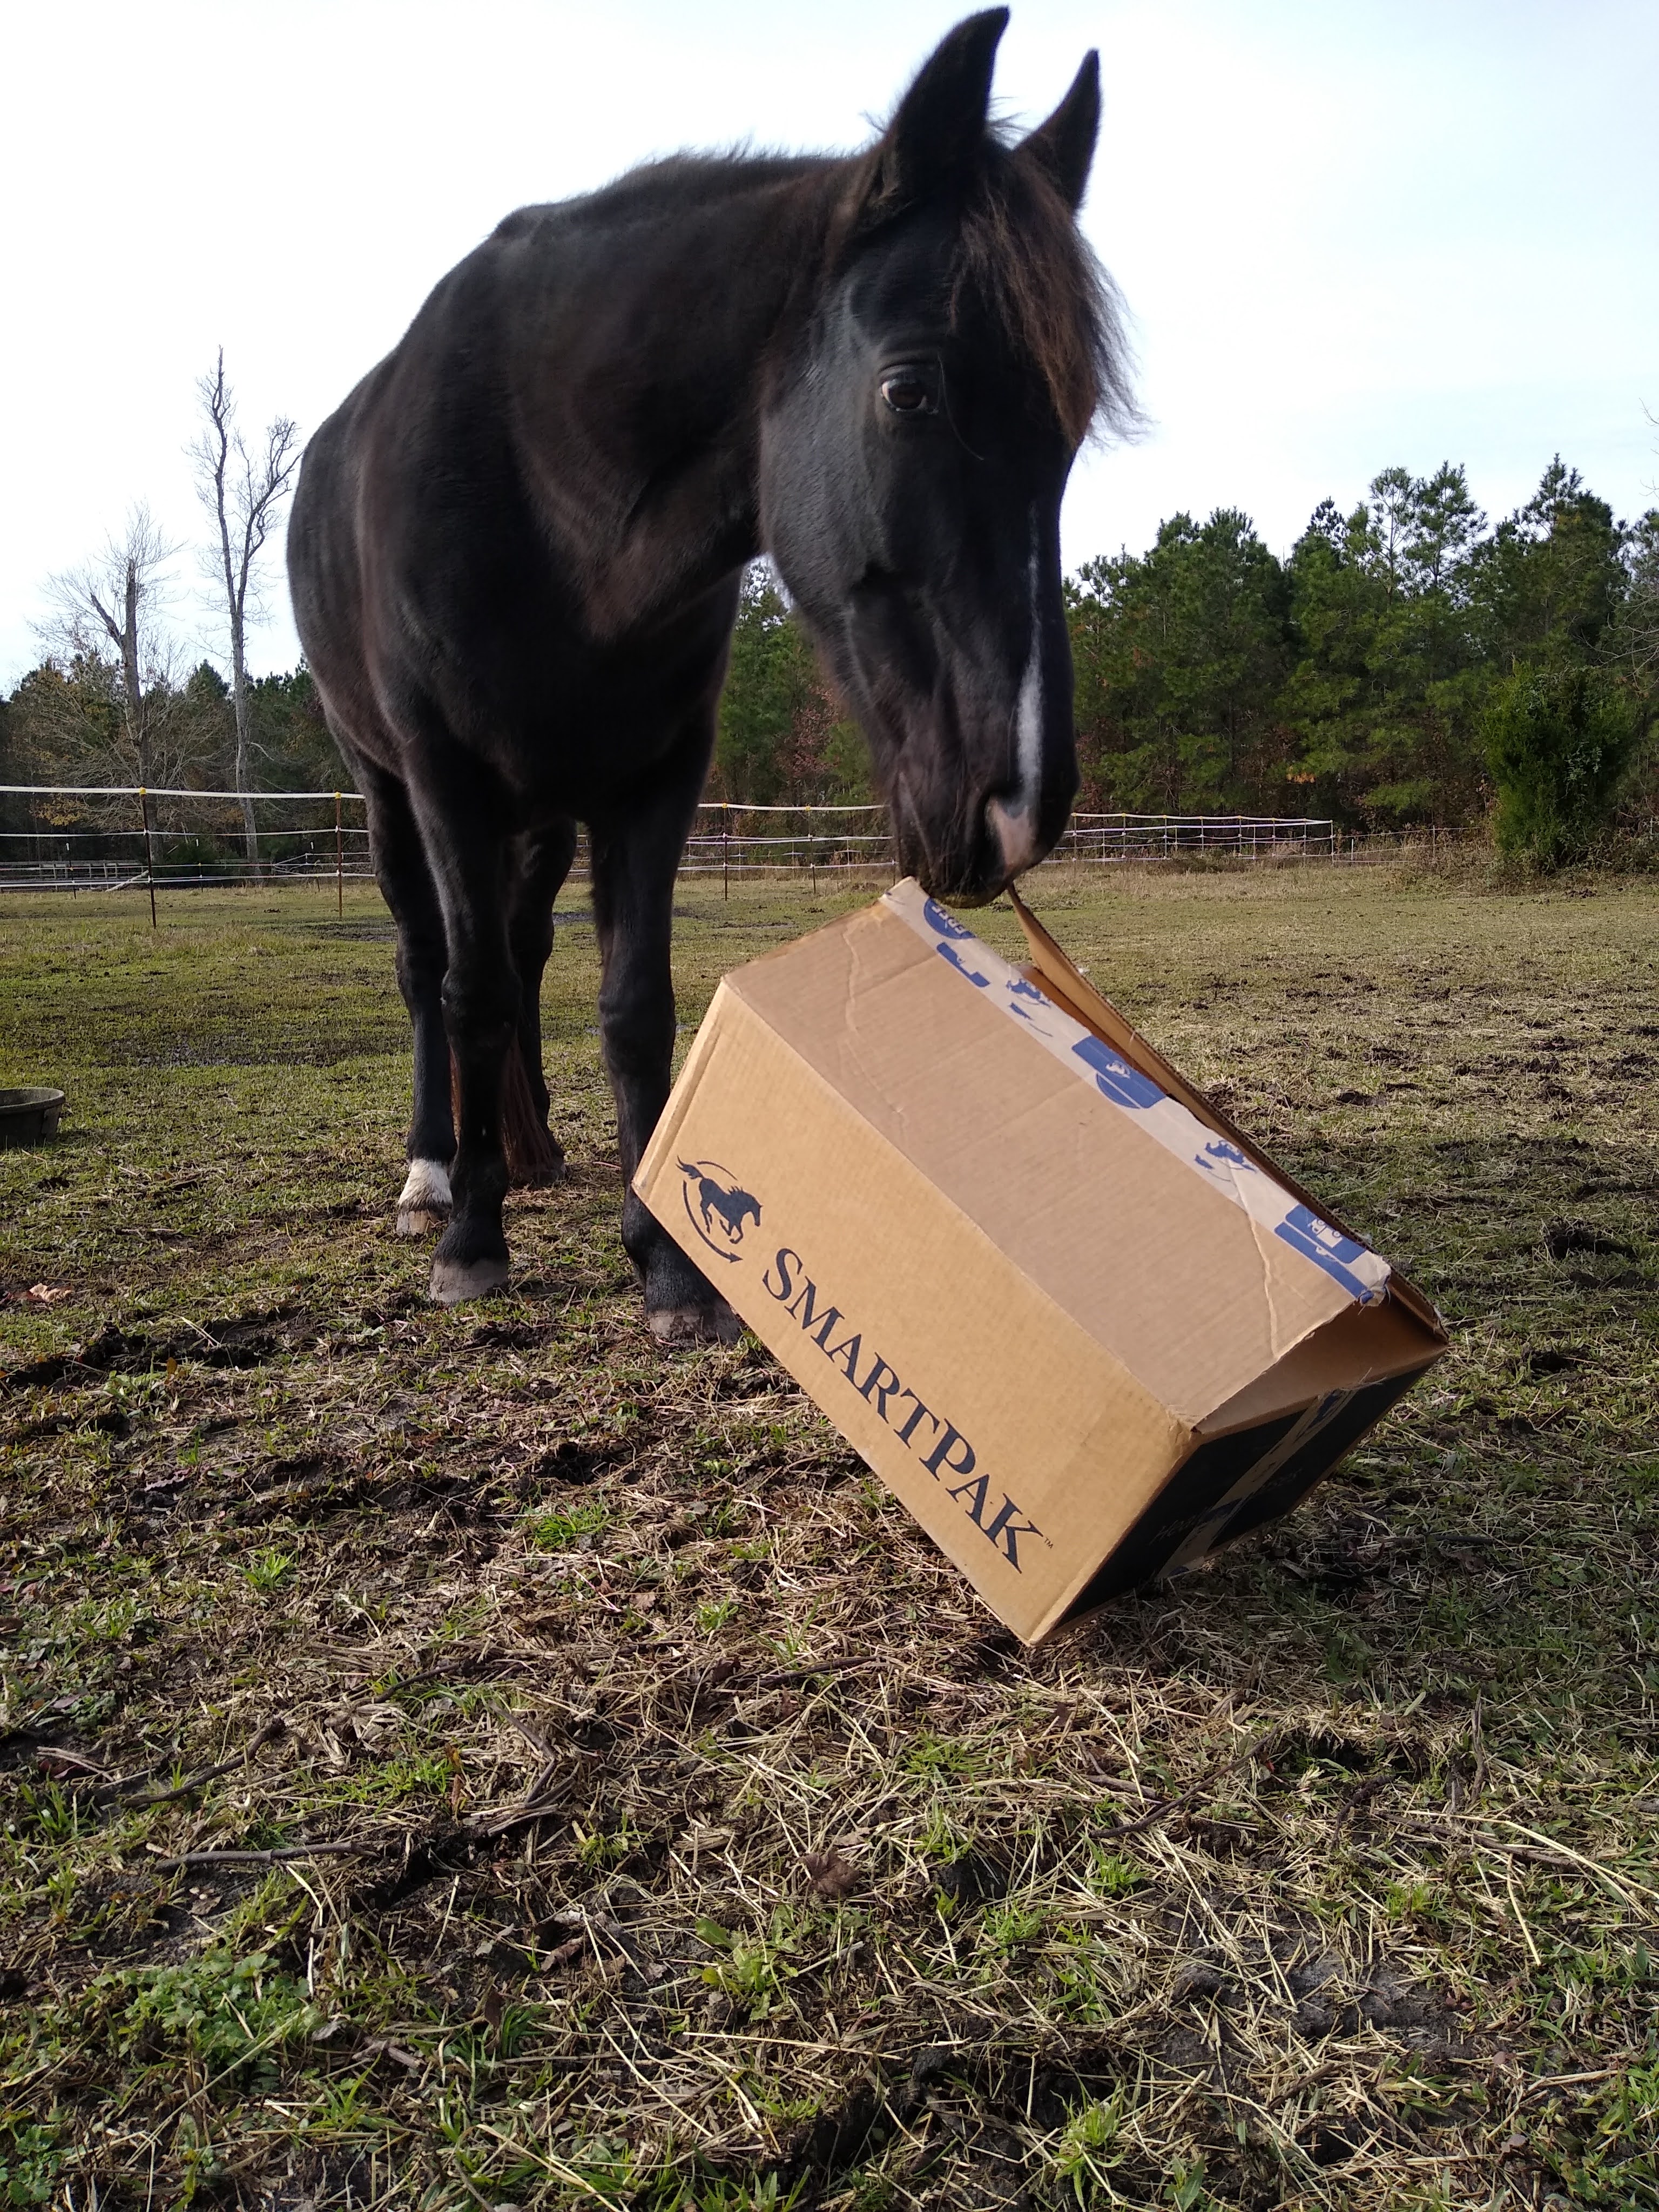 A black horse picks up a forage box and lifts it off the ground.